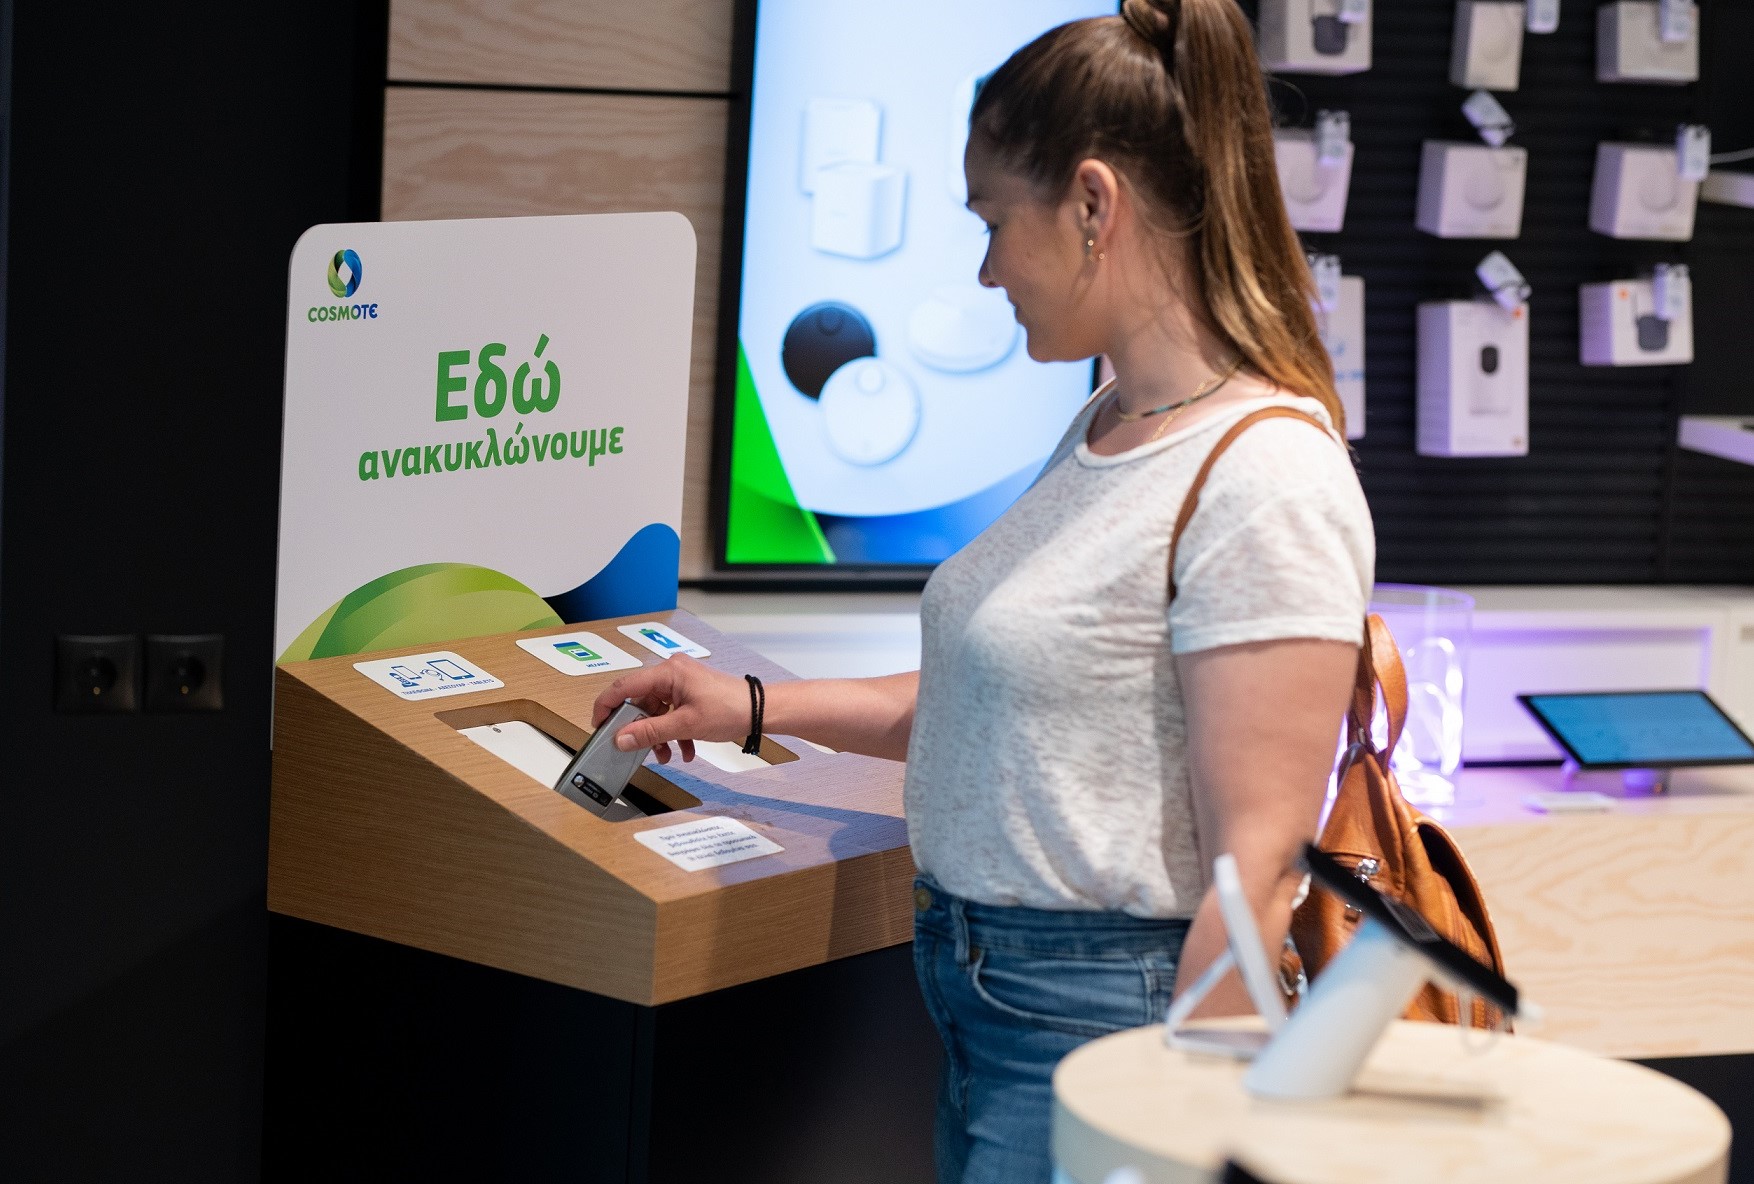 , The appliance recycling program at COSMOTE and GERMANOS stores contributes to clean seas and coasts